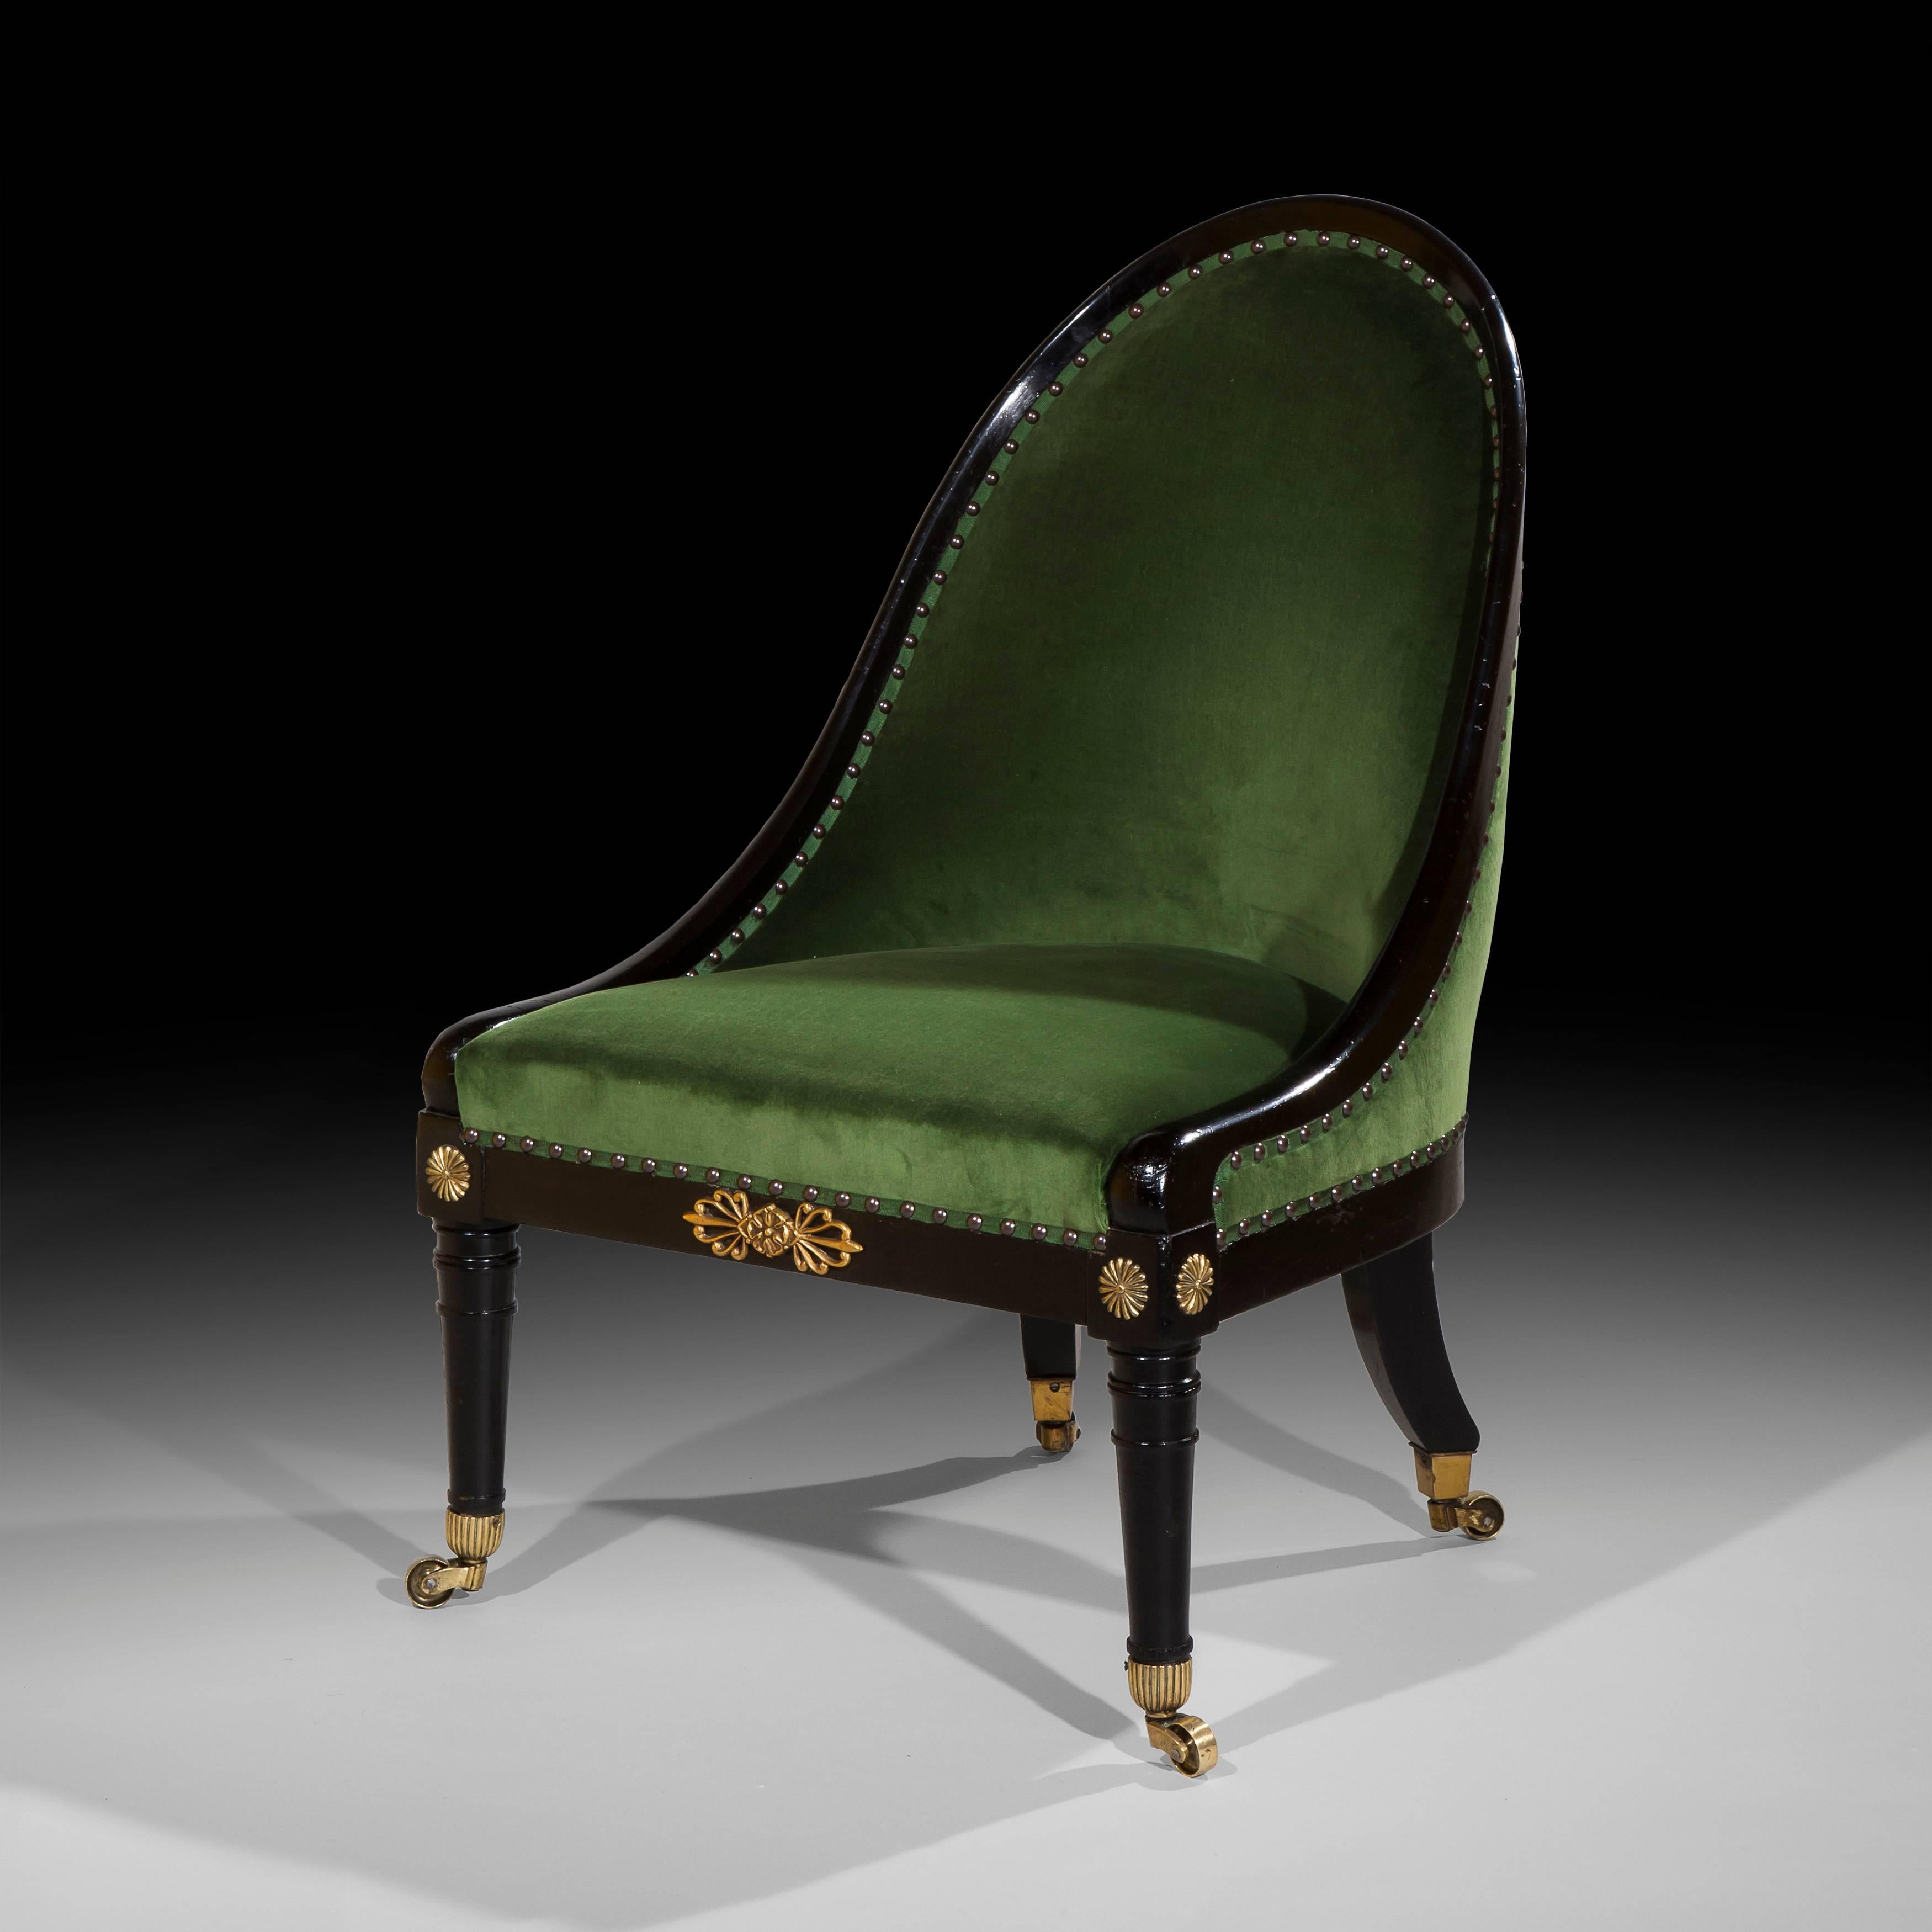 An elegant Regency period ebonised and brass mounted 'Roman' spoon-back low or slipper chair, circa 1810.

The padded arched spoon back over upholstered seat with brass embellished seat rails, raised on turned tapering supports at the front and